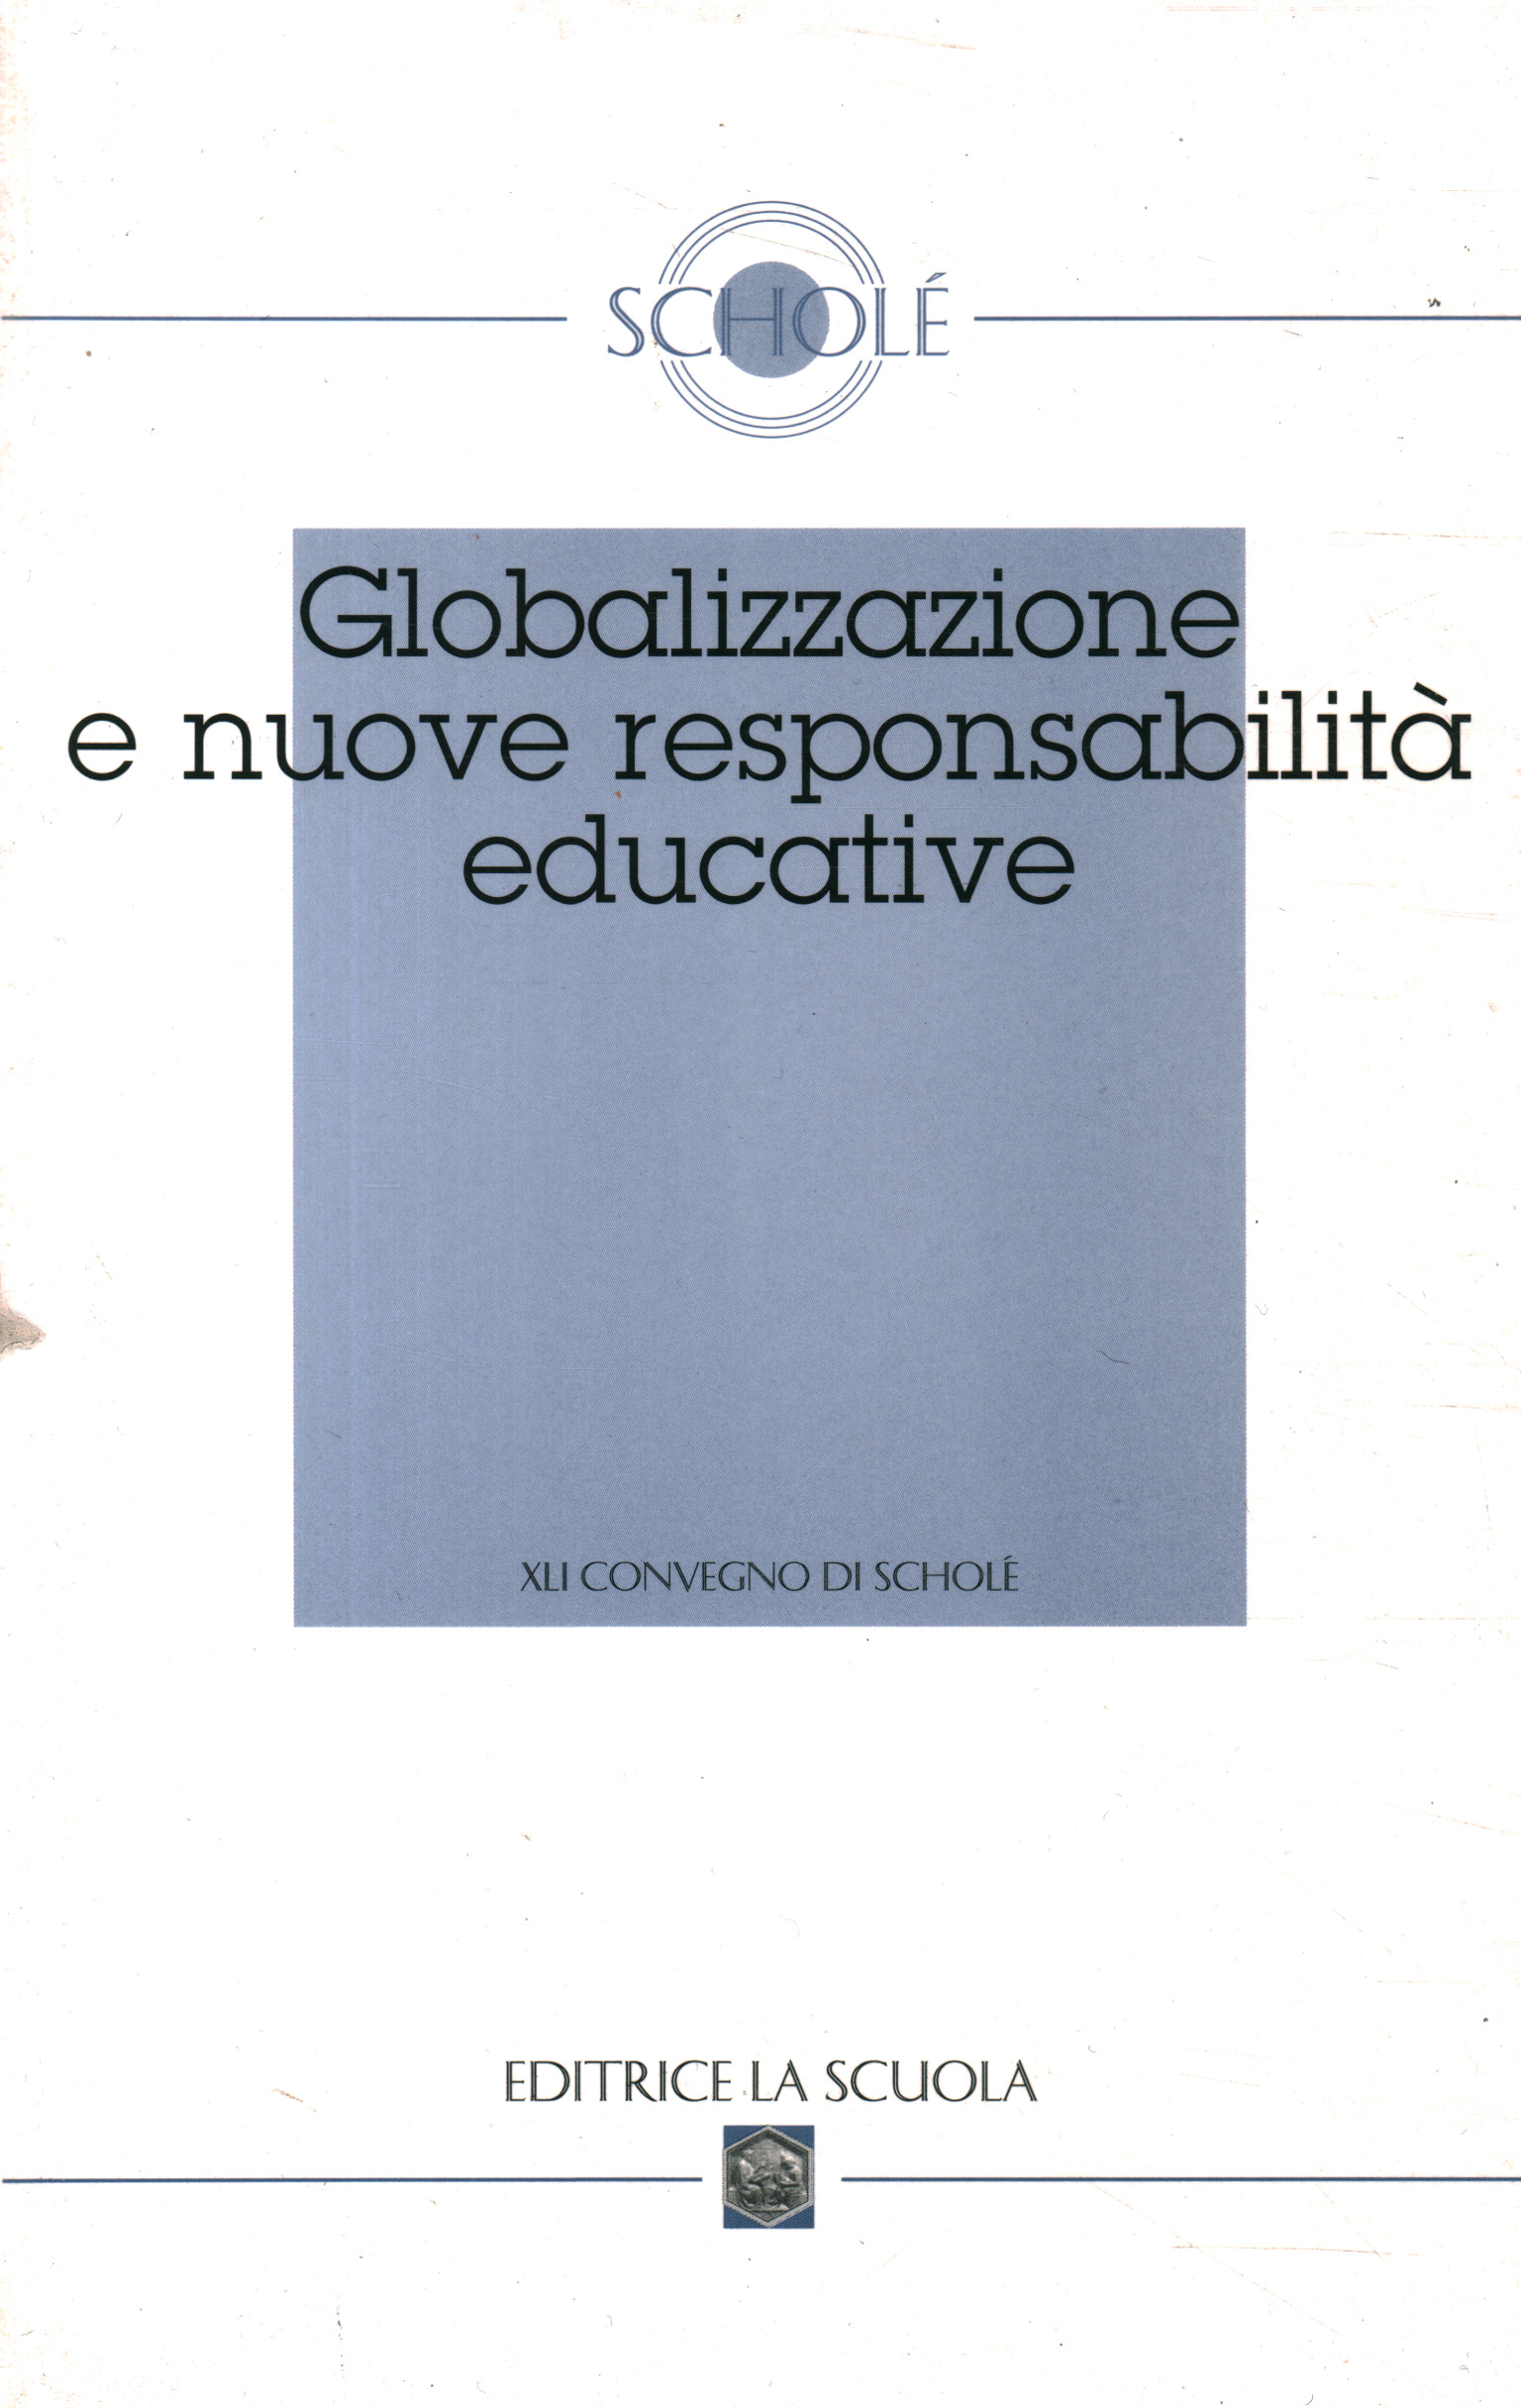 Globalization and new responsibilities%,Globalization and new responsibilities%